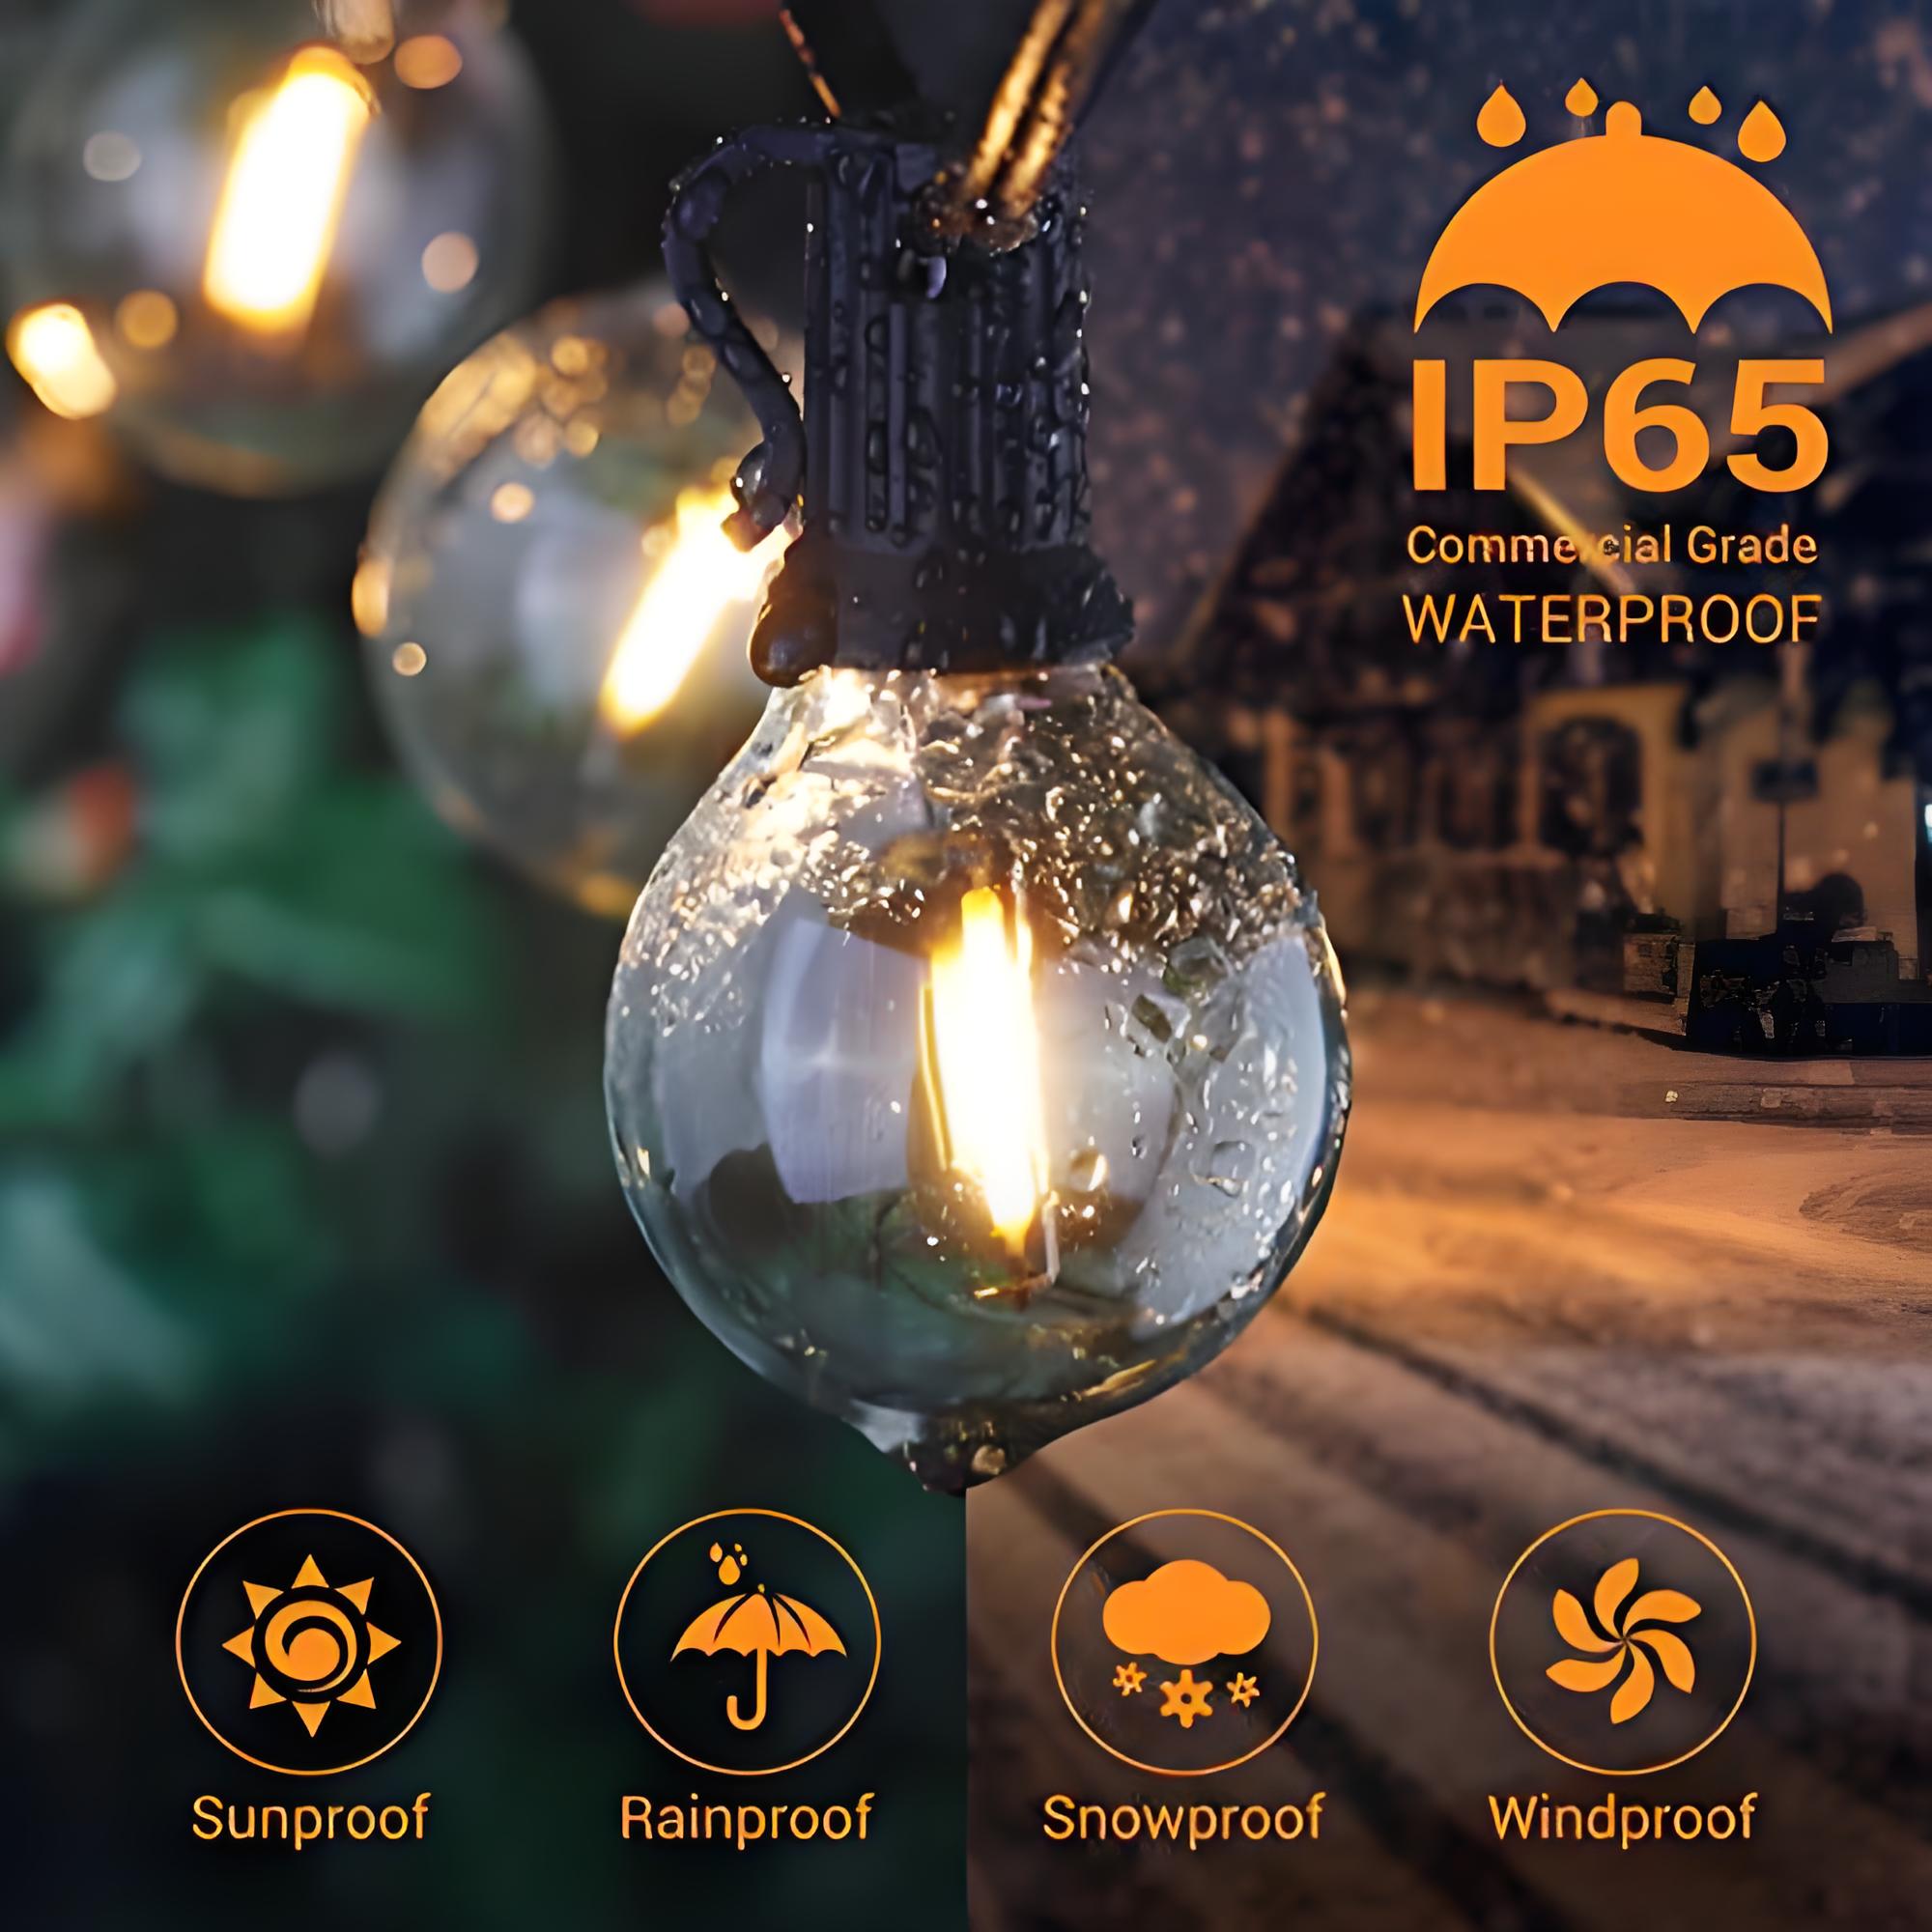 Outdoor String Lights, Connectable 32FT 30+3 Bulbs G40 Globe Led String Lights, IP65 Waterproof Outdoor Patio String Lights Plug in for Backyard Porch Garden Bistro Gazebo Cafe Deck Wedding Party